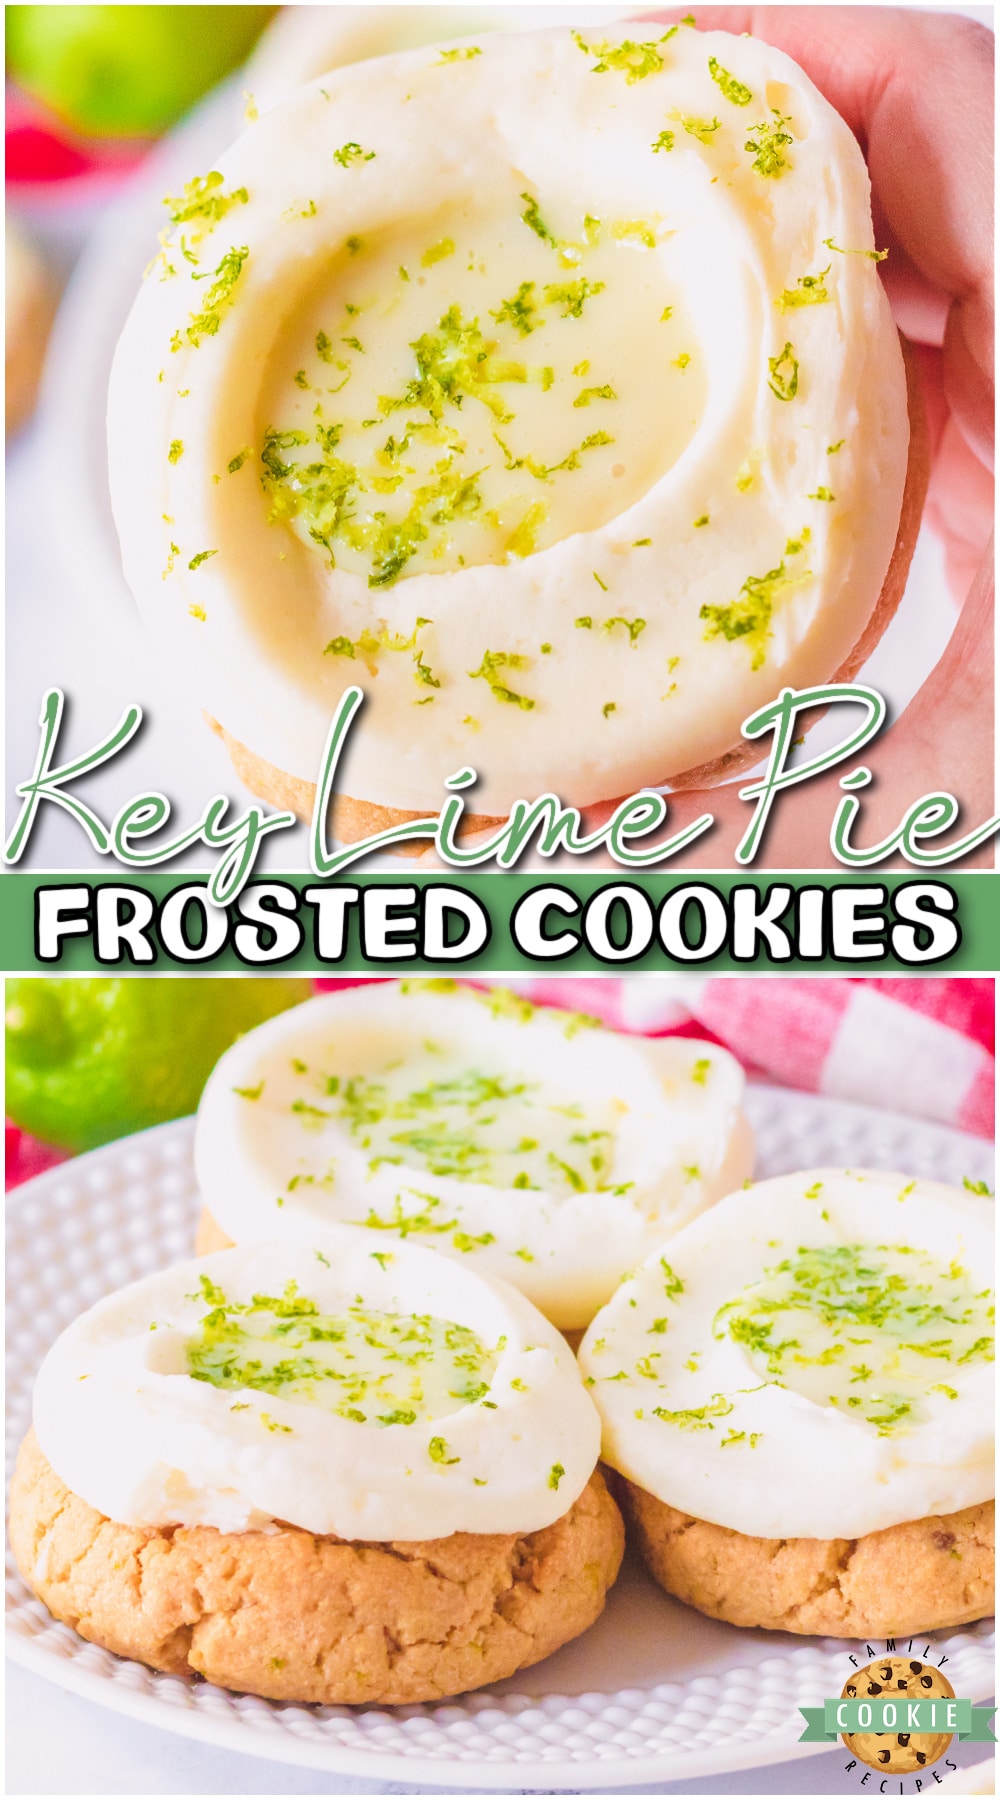 Key lime pie cookies made with a sugar cookie base & topped with key lime filling and a lime buttercream! Tangy, sweet lime cookies that are perfect for summer.